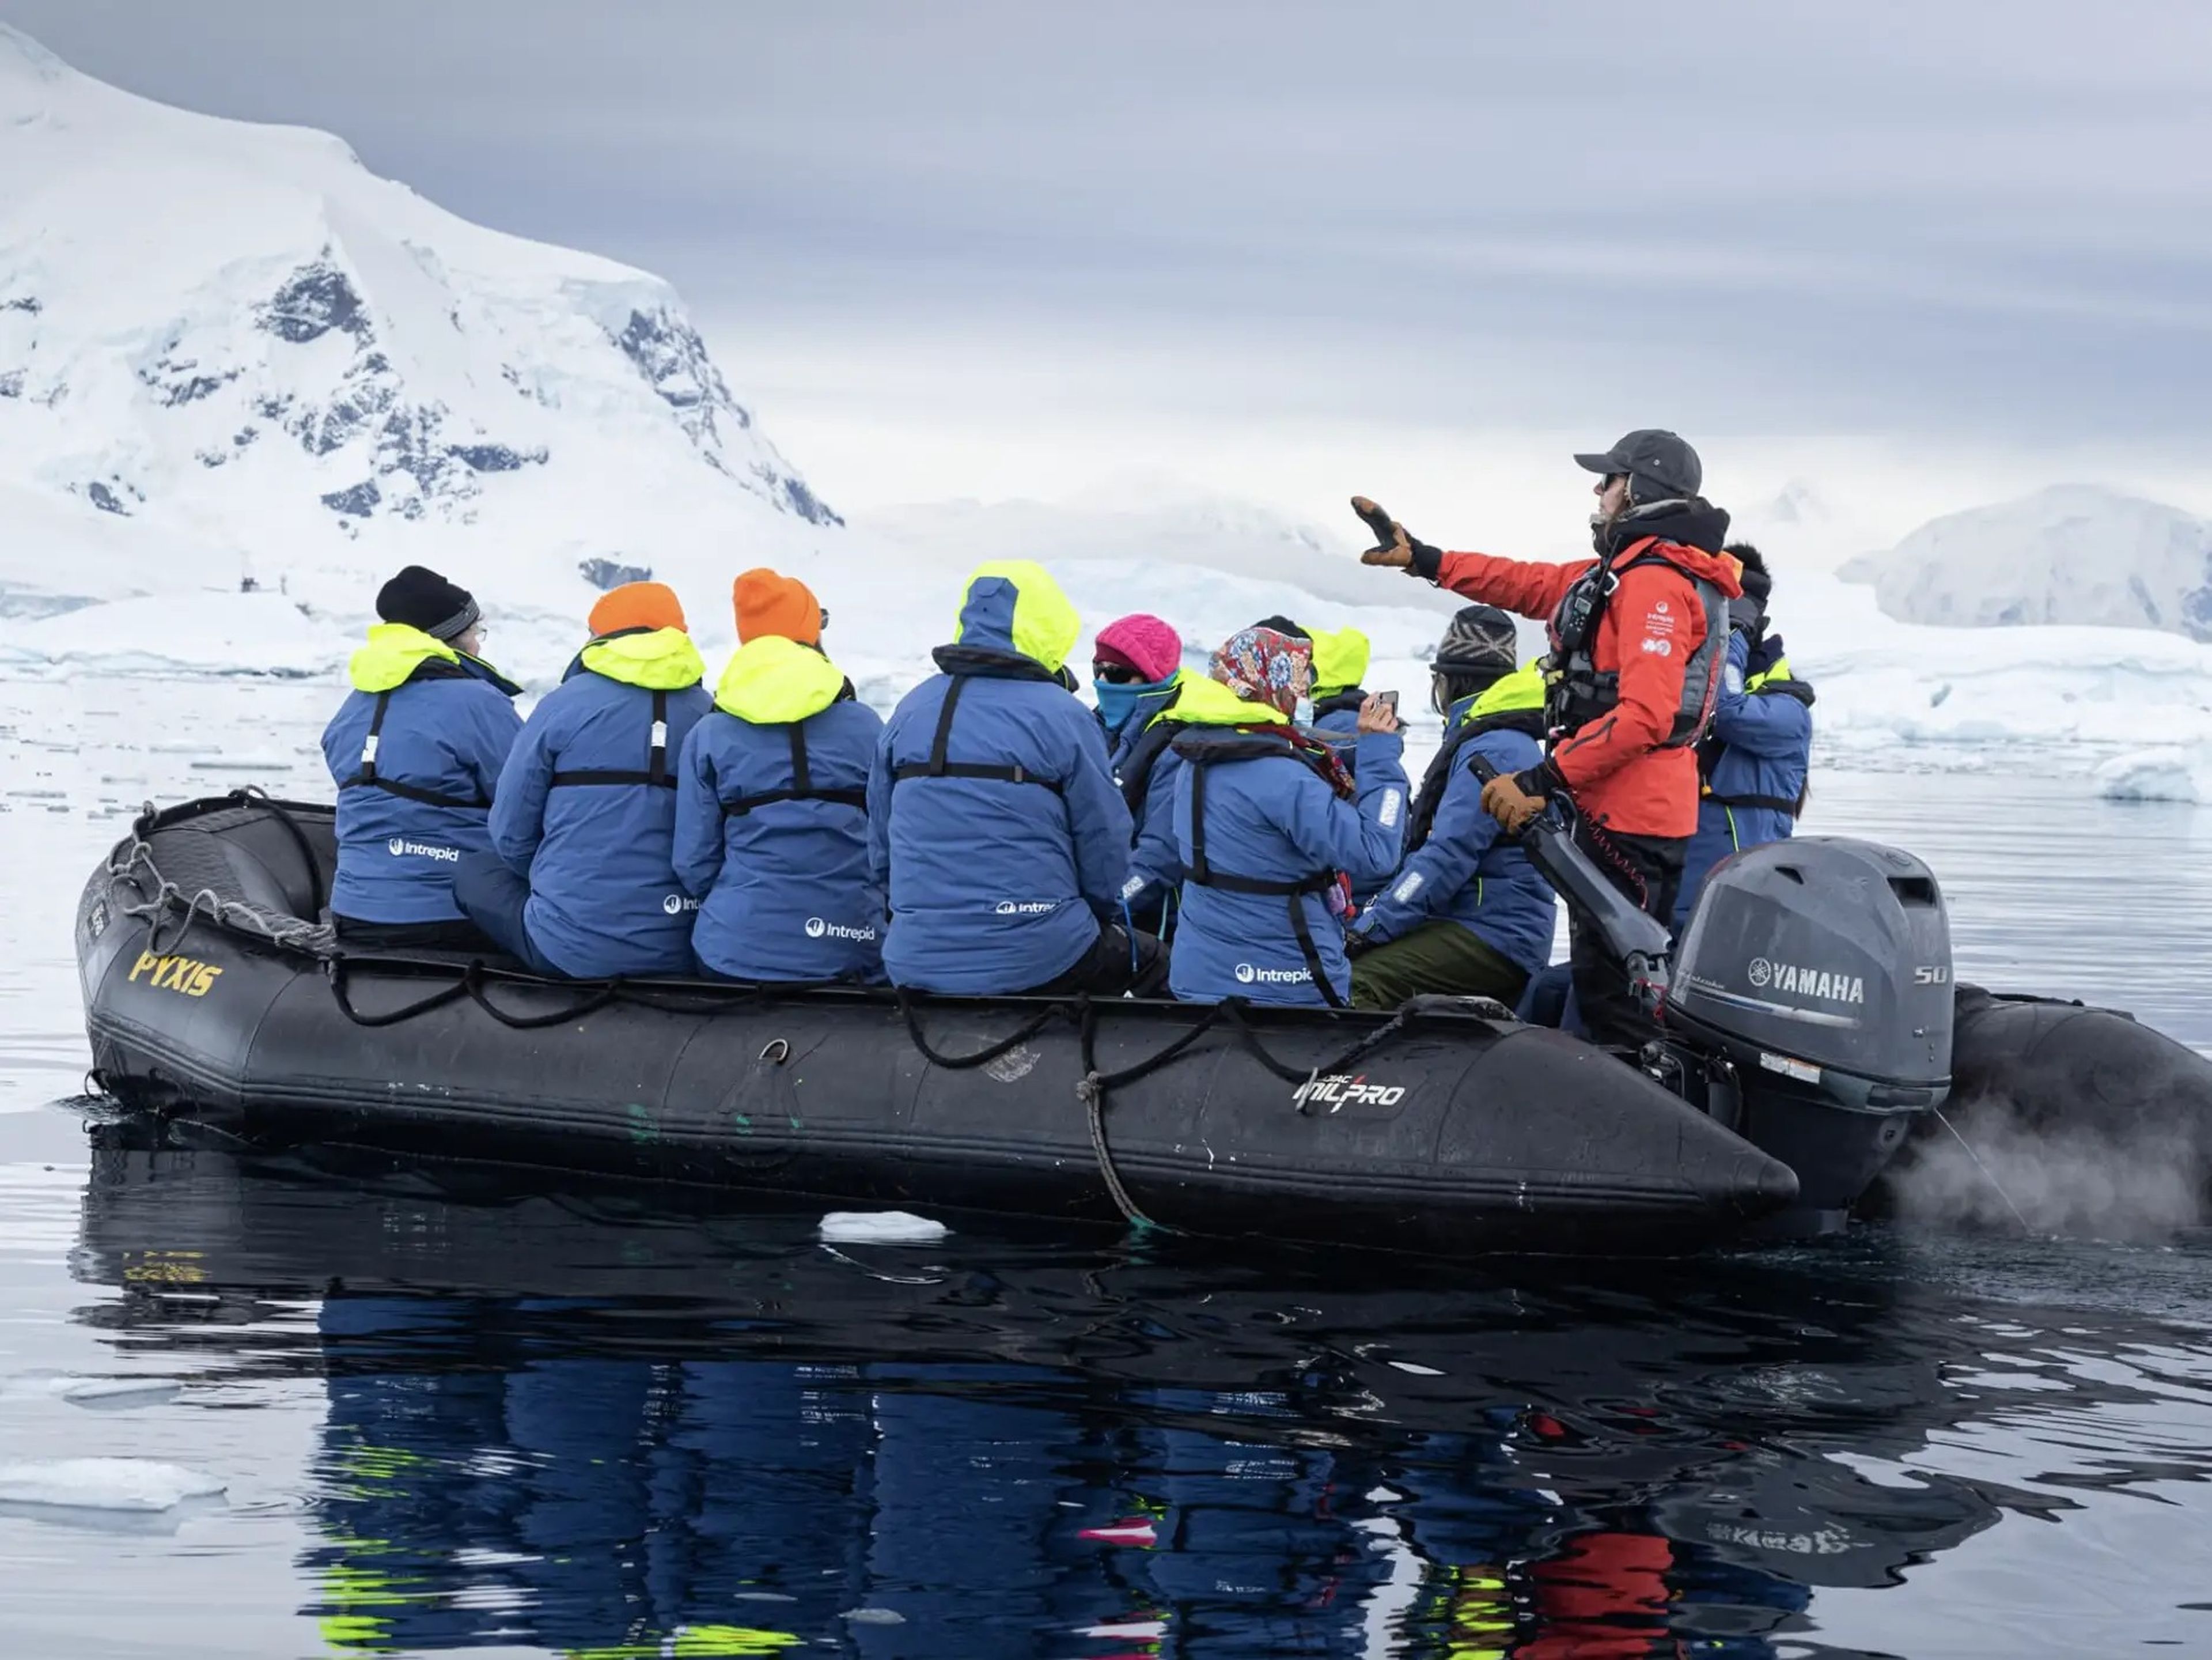 Guests on a zodiac in Antarctica.